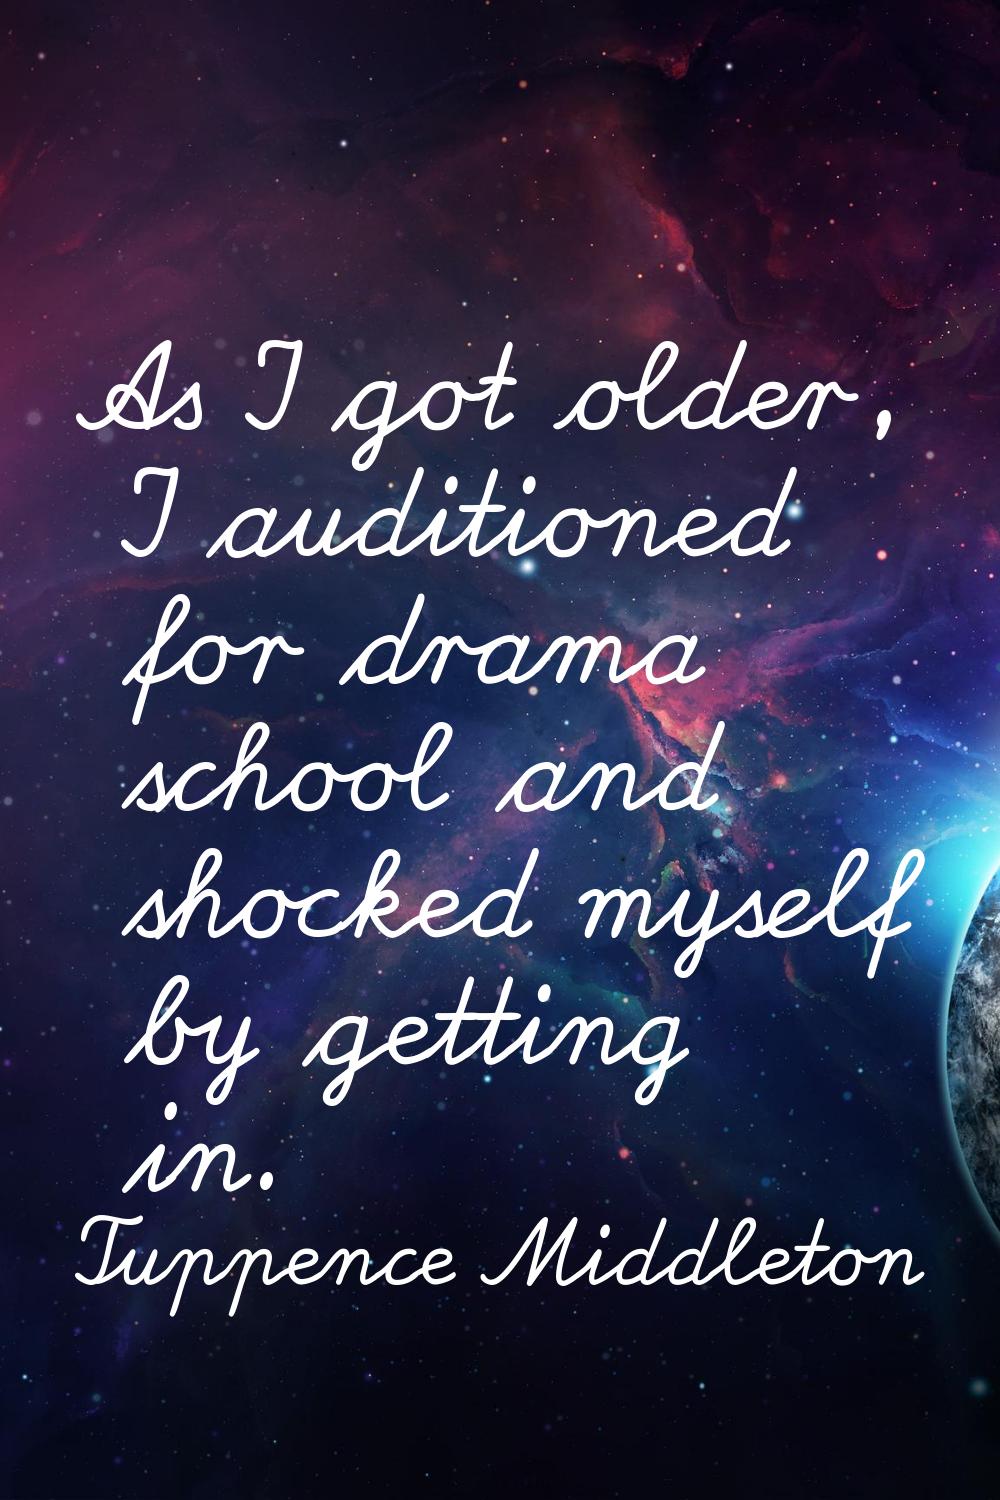 As I got older, I auditioned for drama school and shocked myself by getting in.